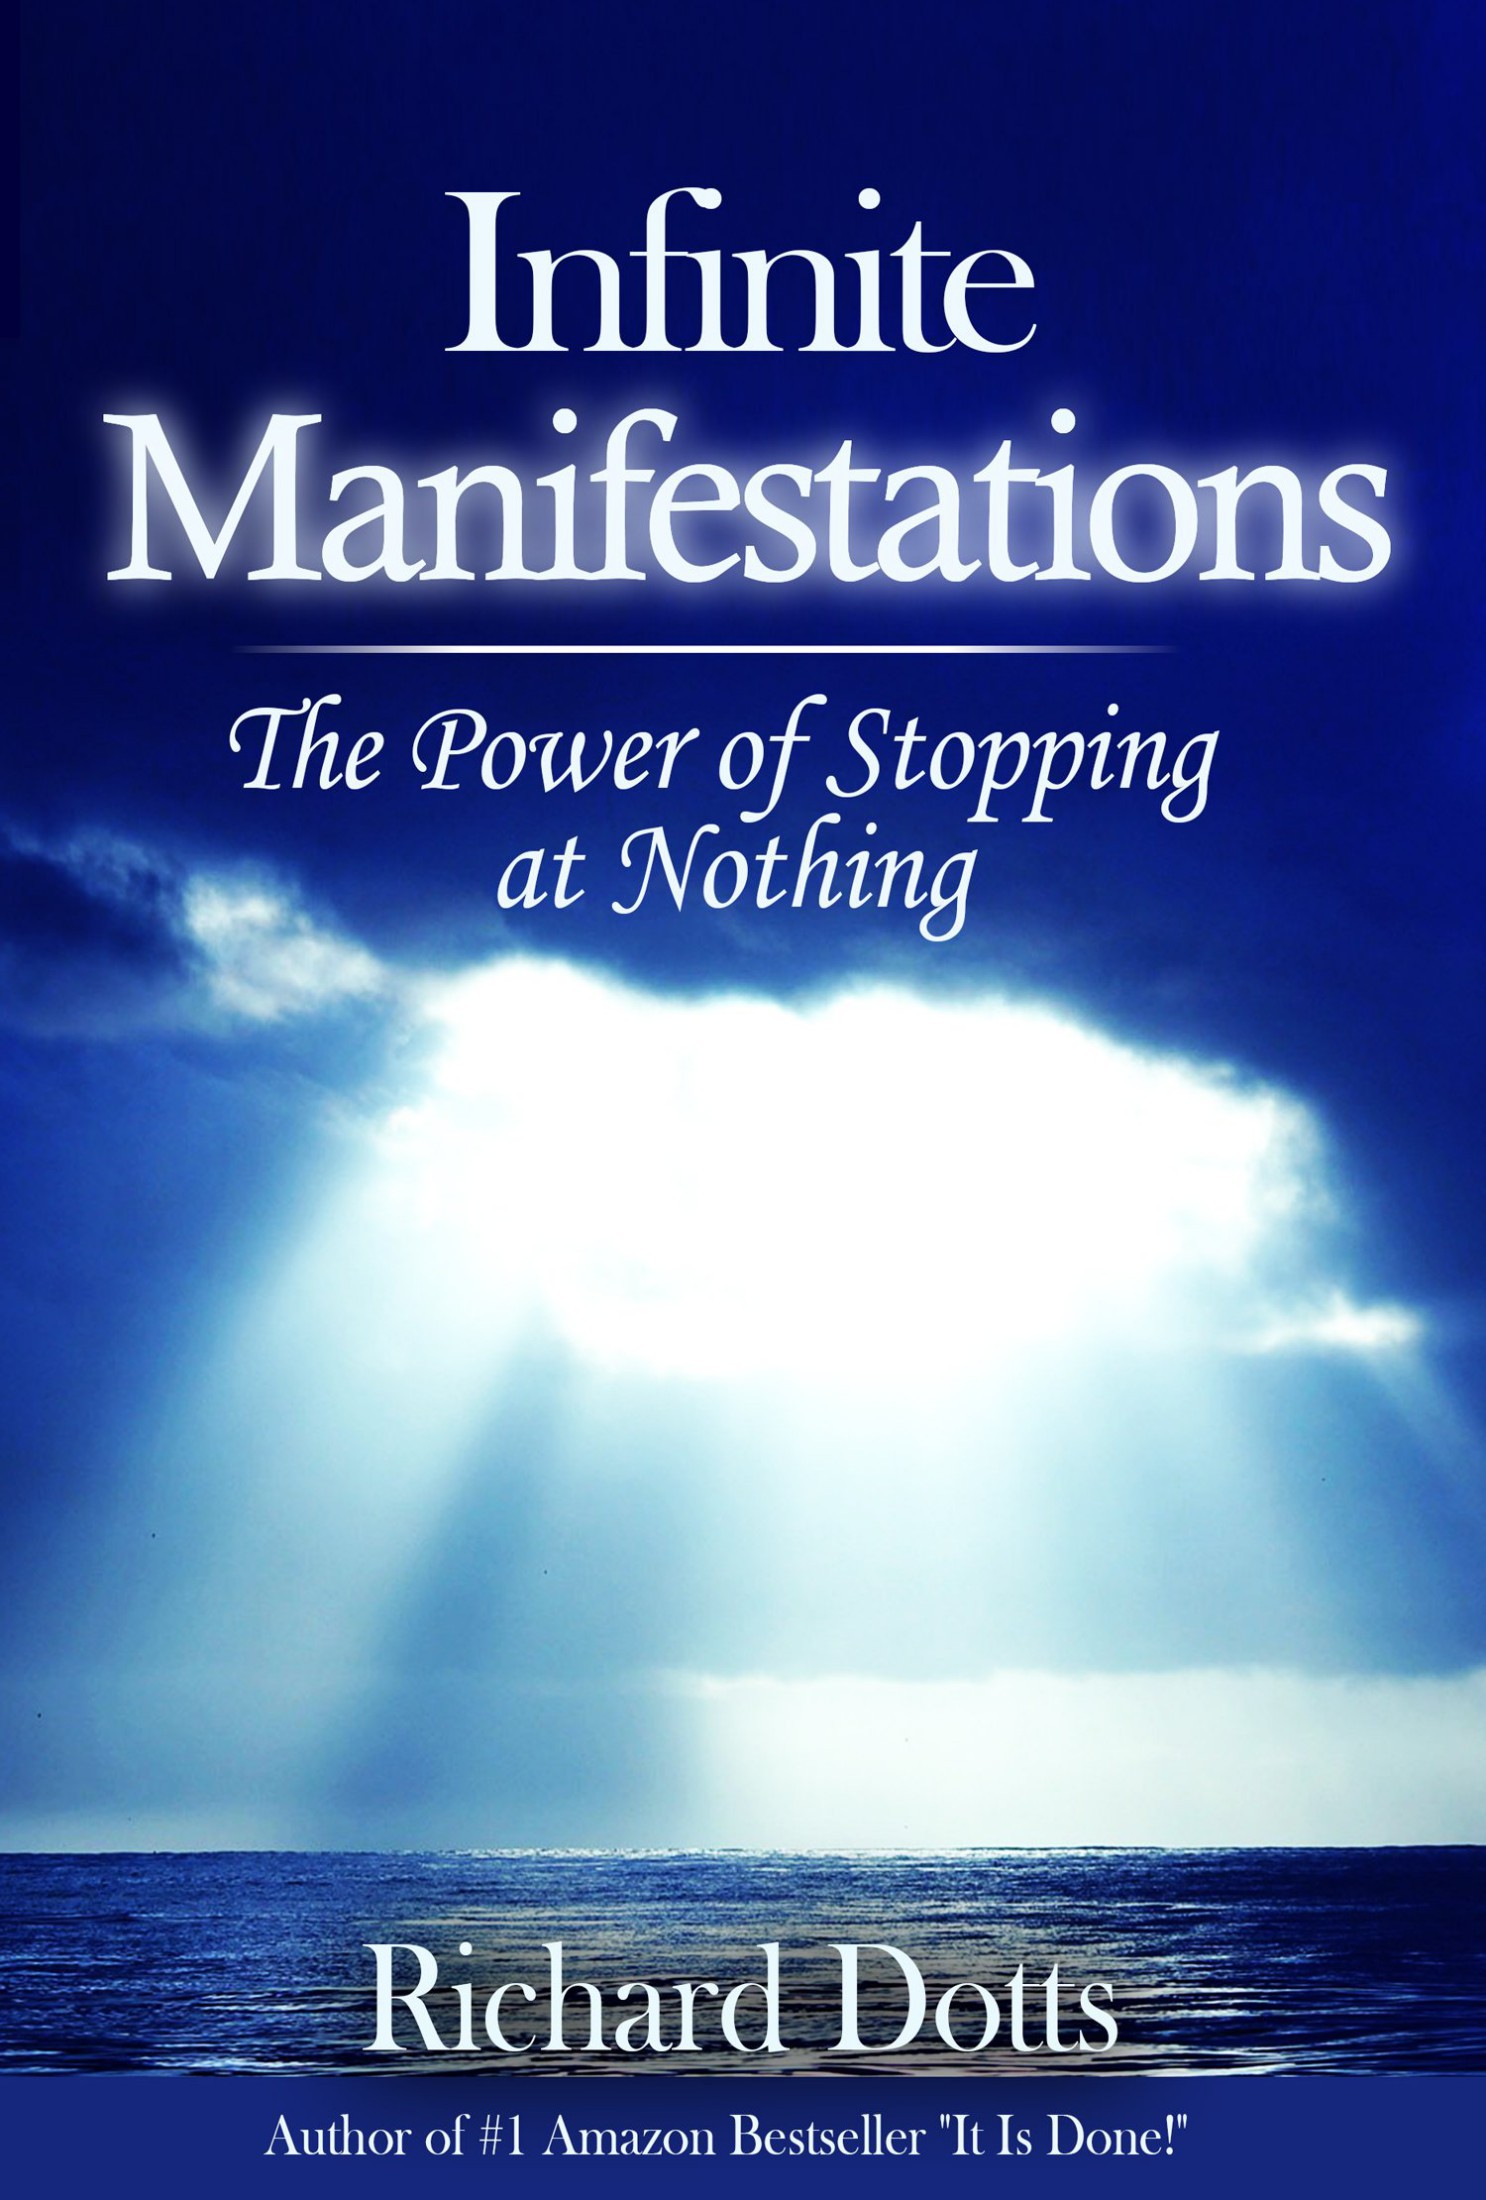 Infinite Manifestations The Power of Stopping at Nothing By Richard Dotts - photo 1